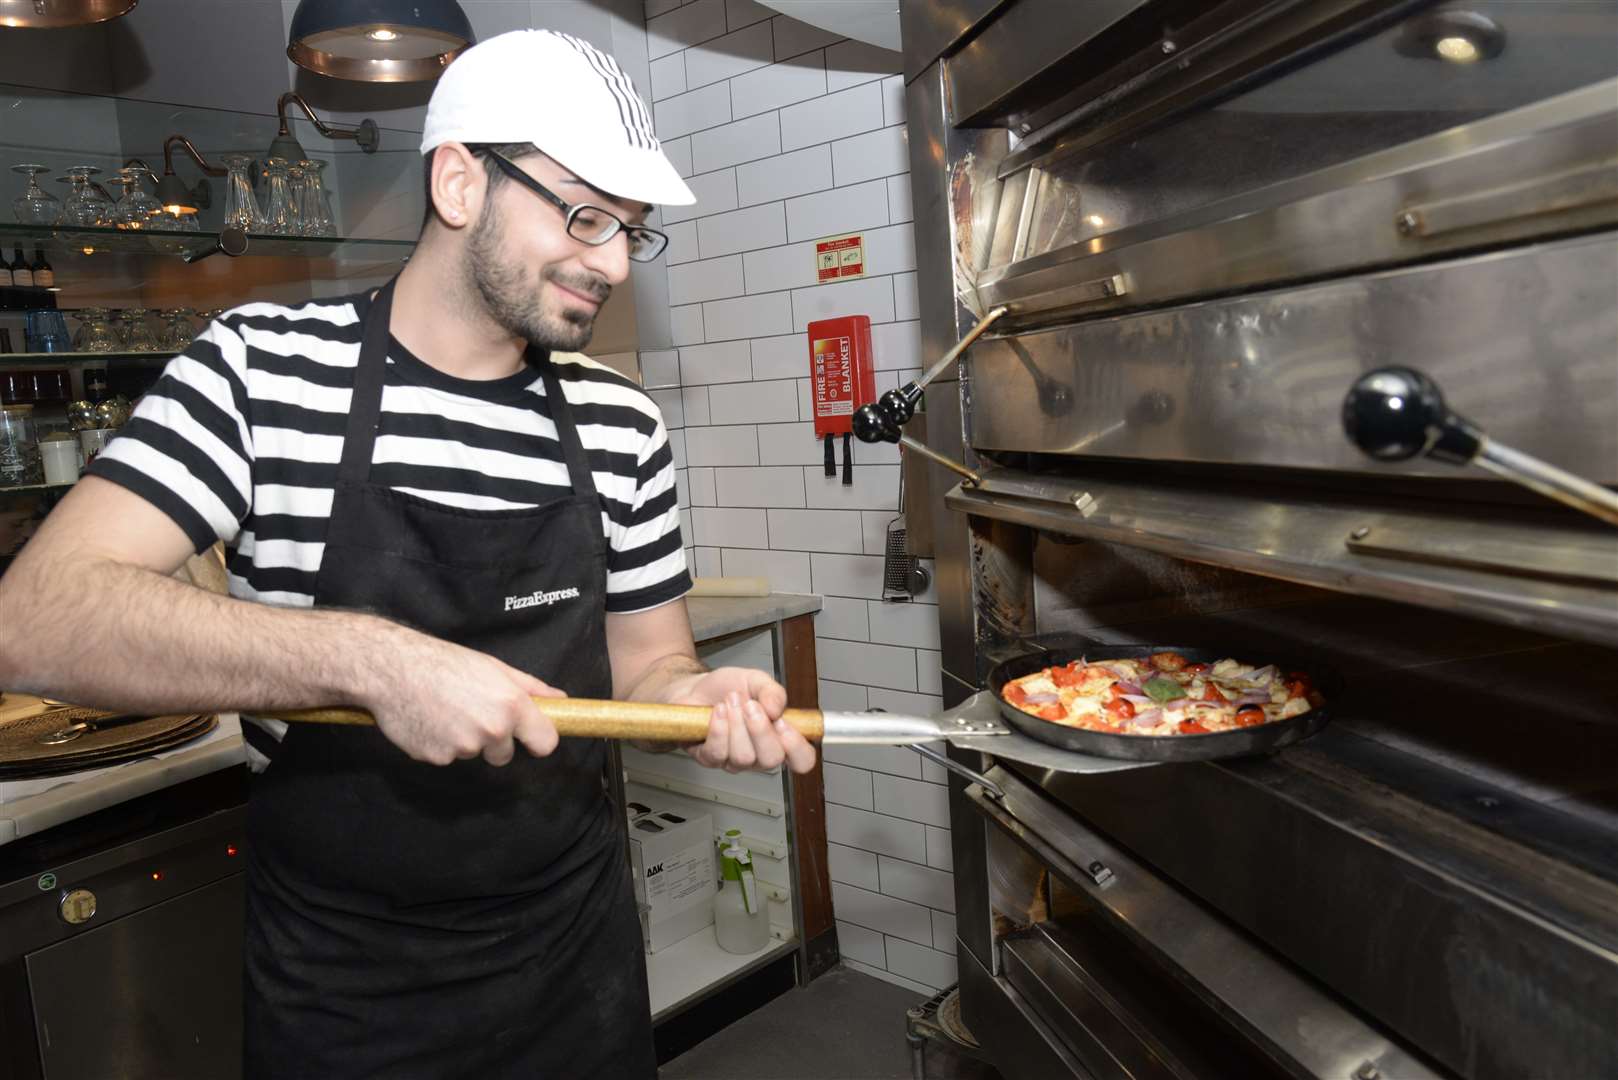 Pizza Express 'hires financial advisers' ahead of crunch talks about crippling debt